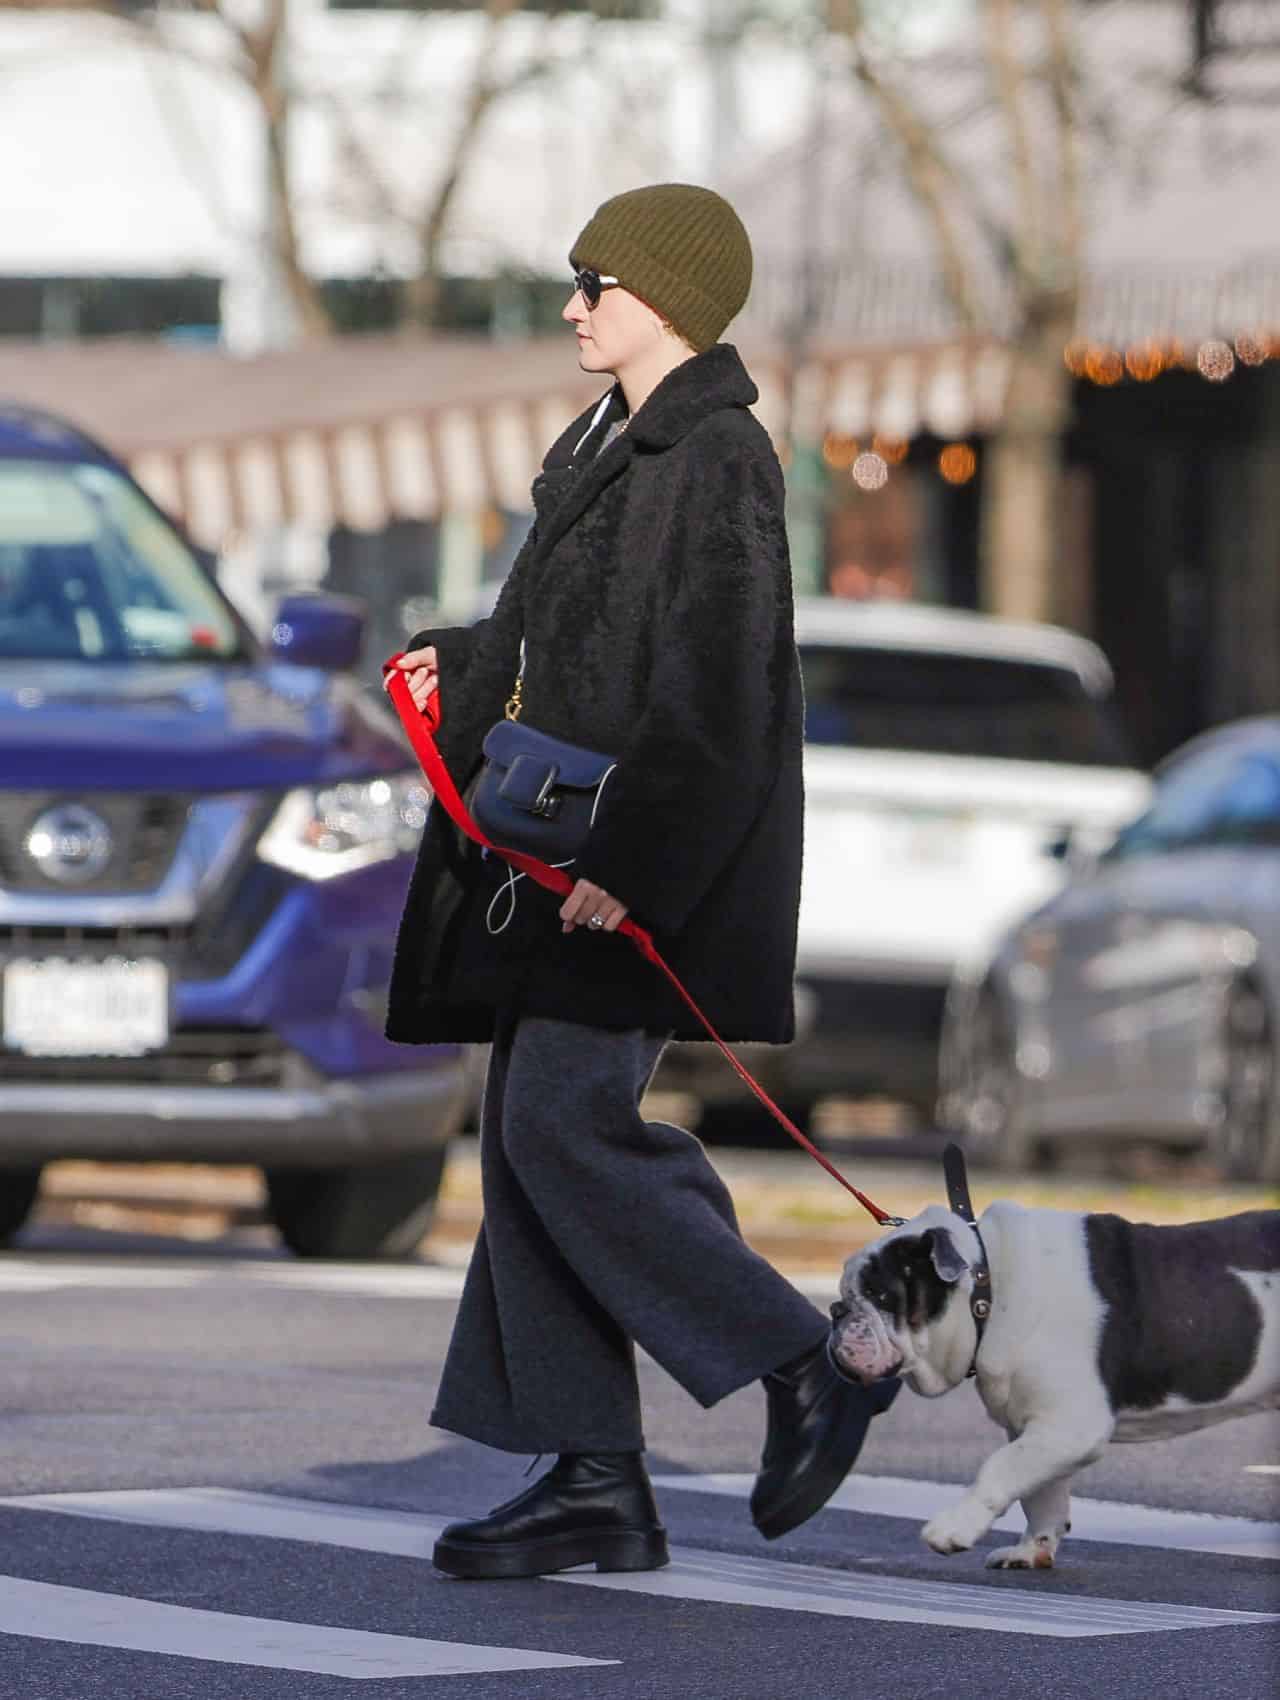 Julia Garner Sports a Relaxed Look During Her Dog Walk in New York